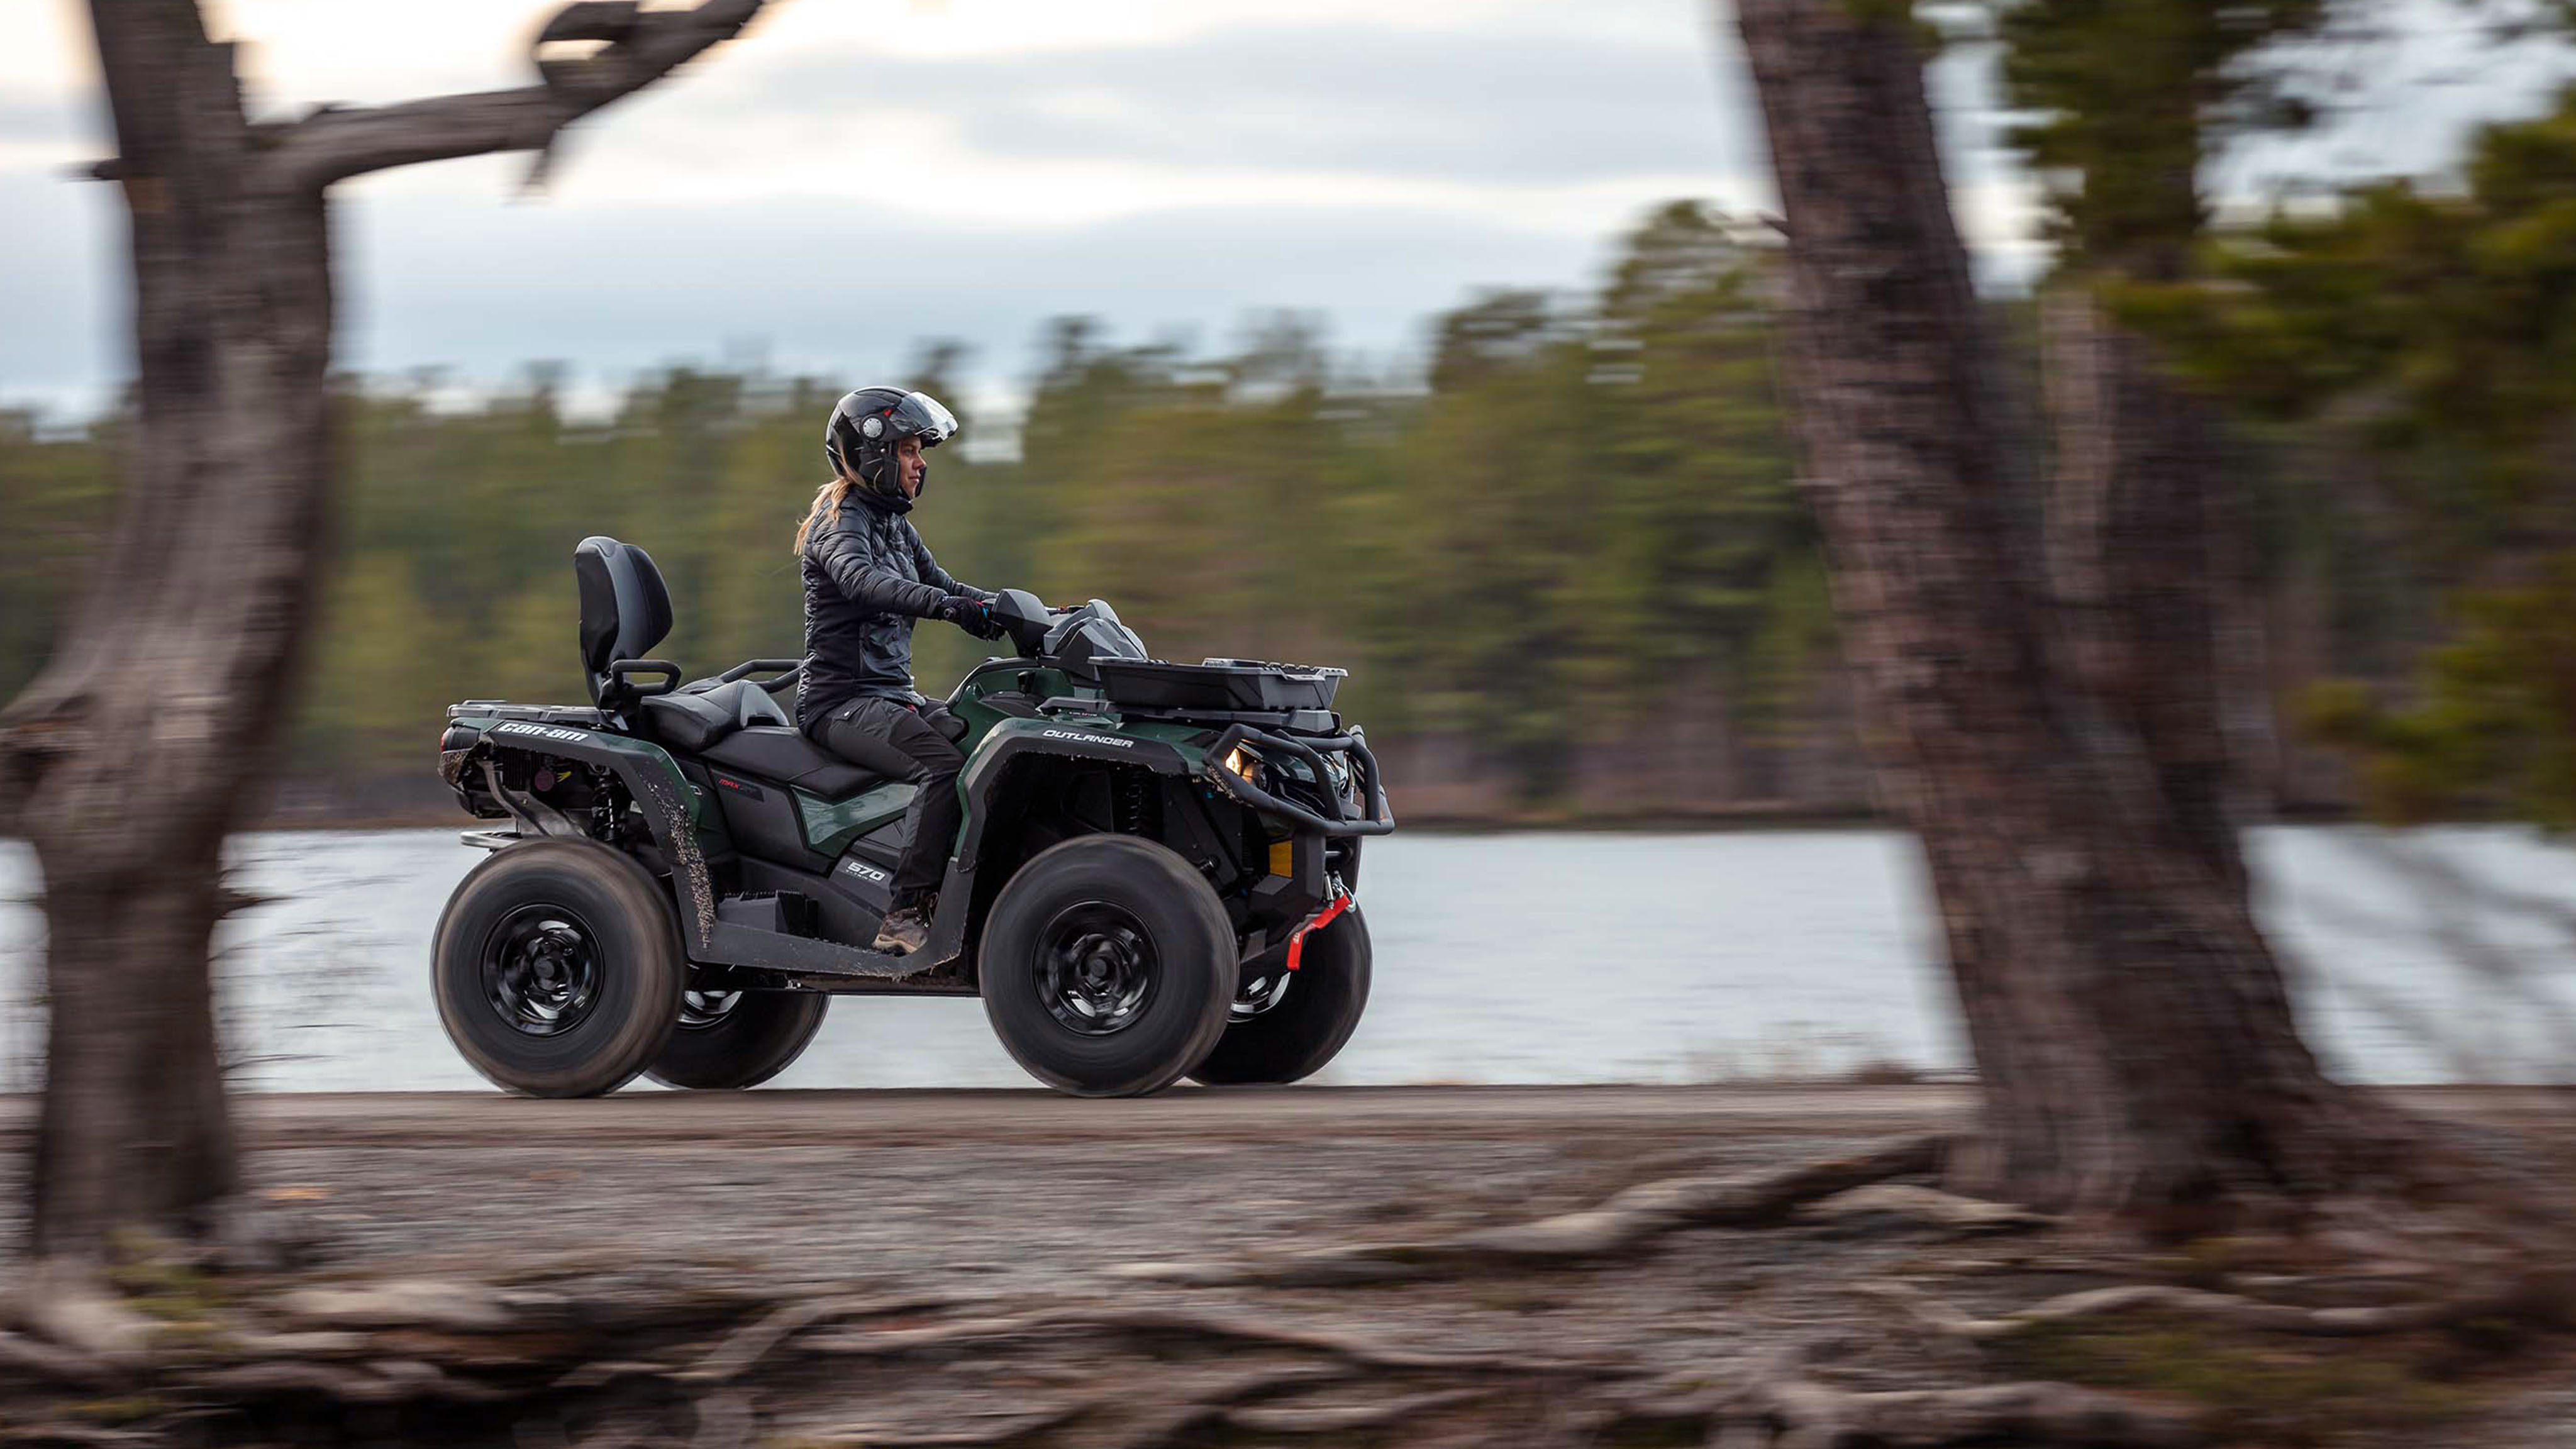 Woman on Can-Am Off-Road ATV